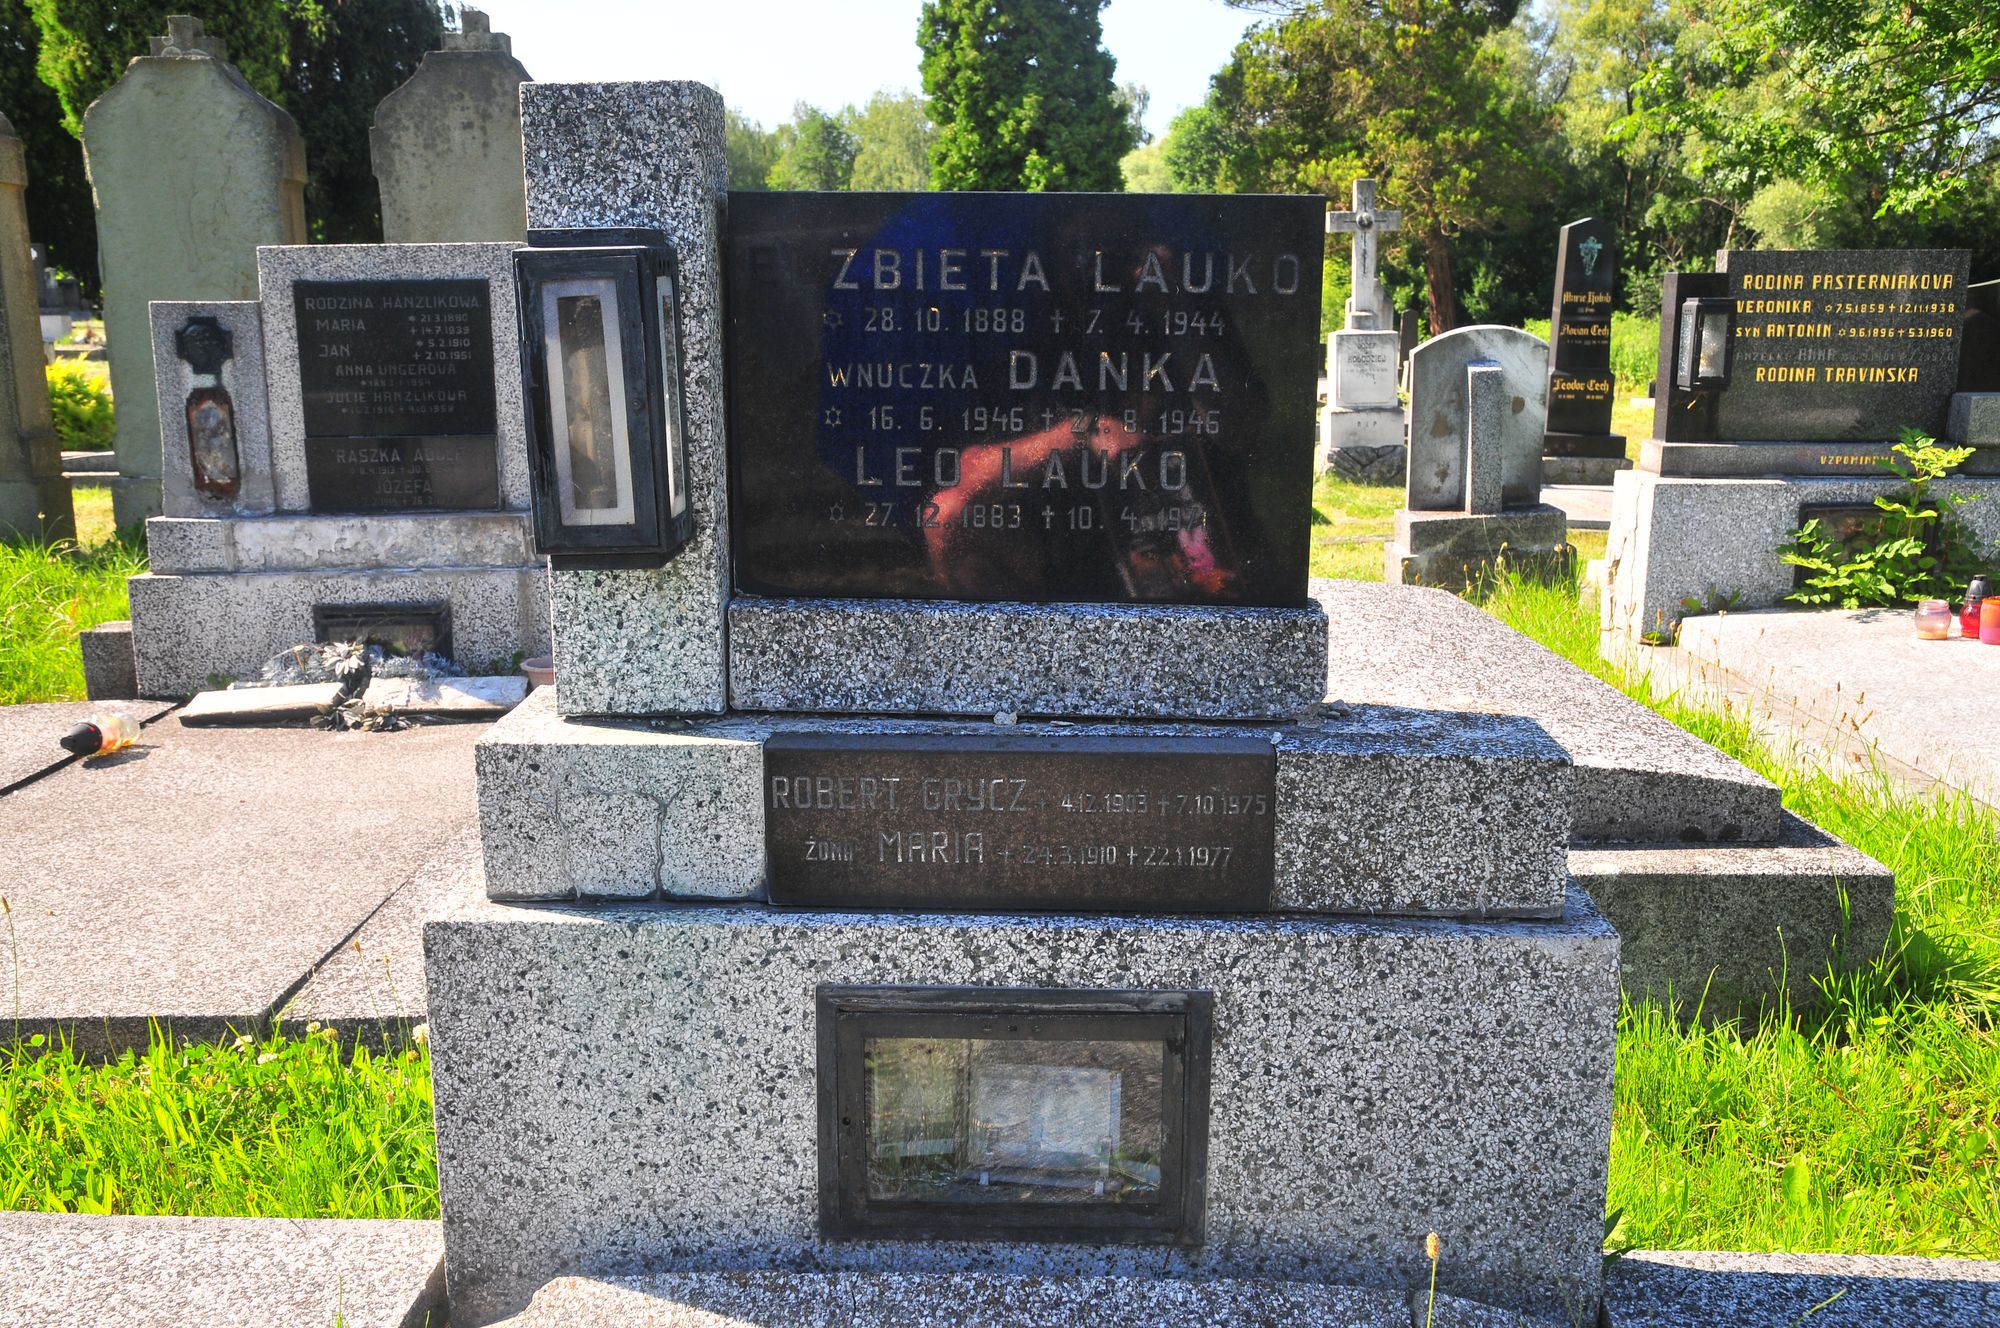 Tombstone of the Lauko family, Maria and Robert Gracz, Karviná Doly cemetery, state 2022